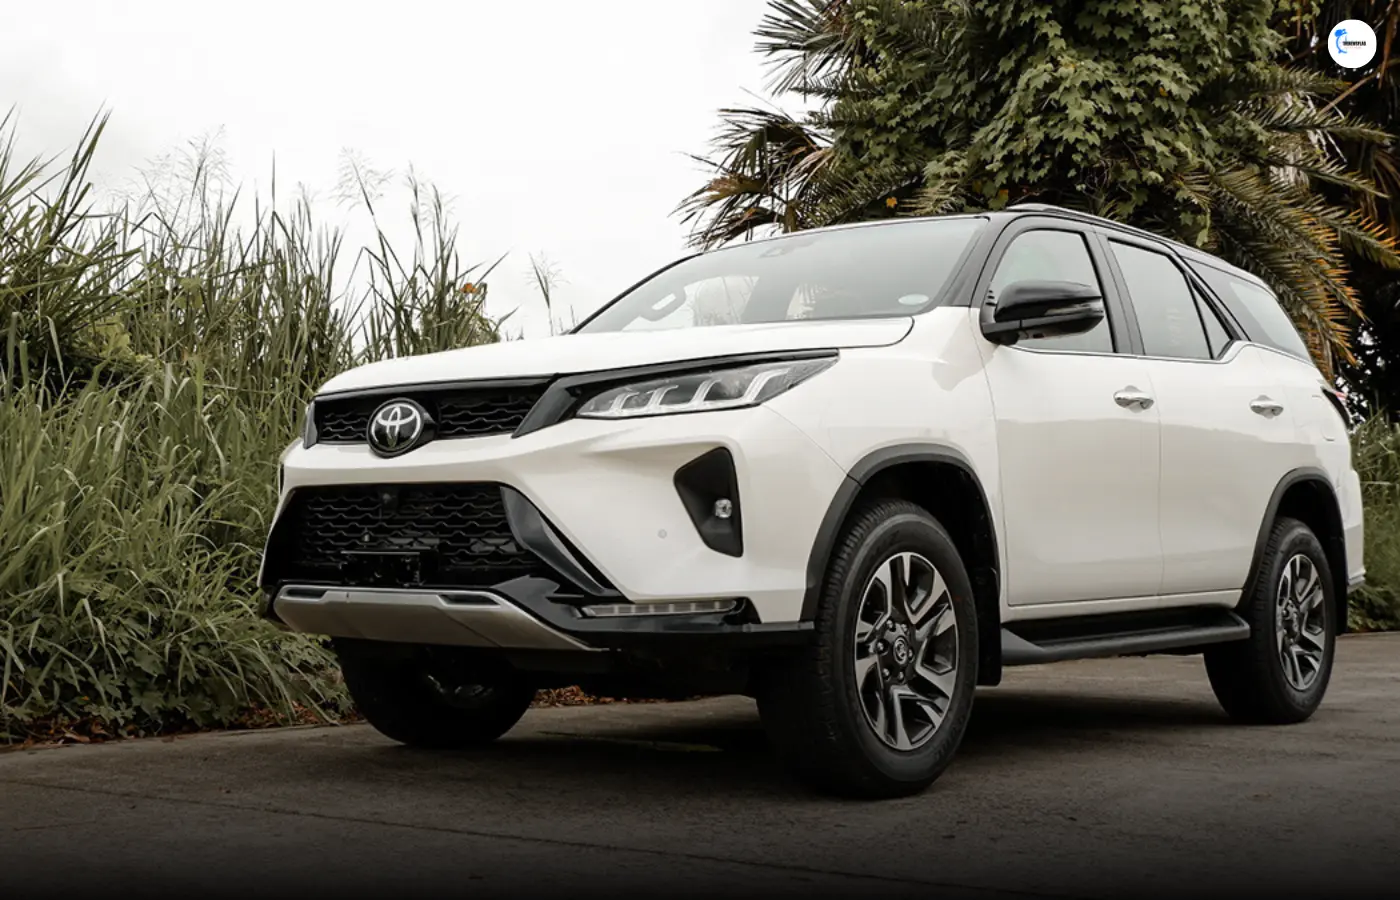 Future Toyota SUVs: Features, Cost, and Details